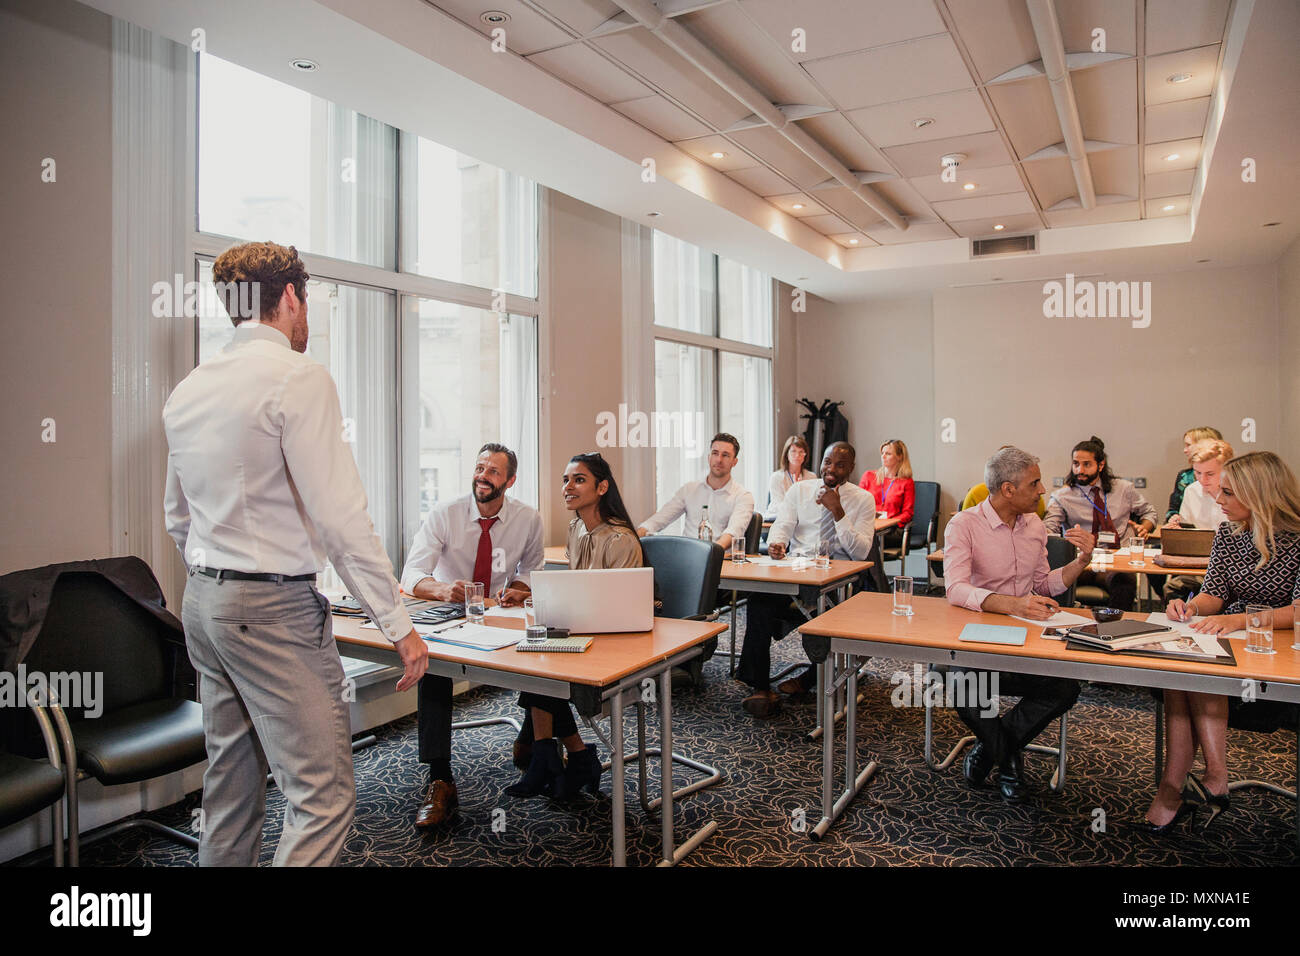 Rear view of an unrecognisable businessman giving a presentation at a conference. Stock Photo